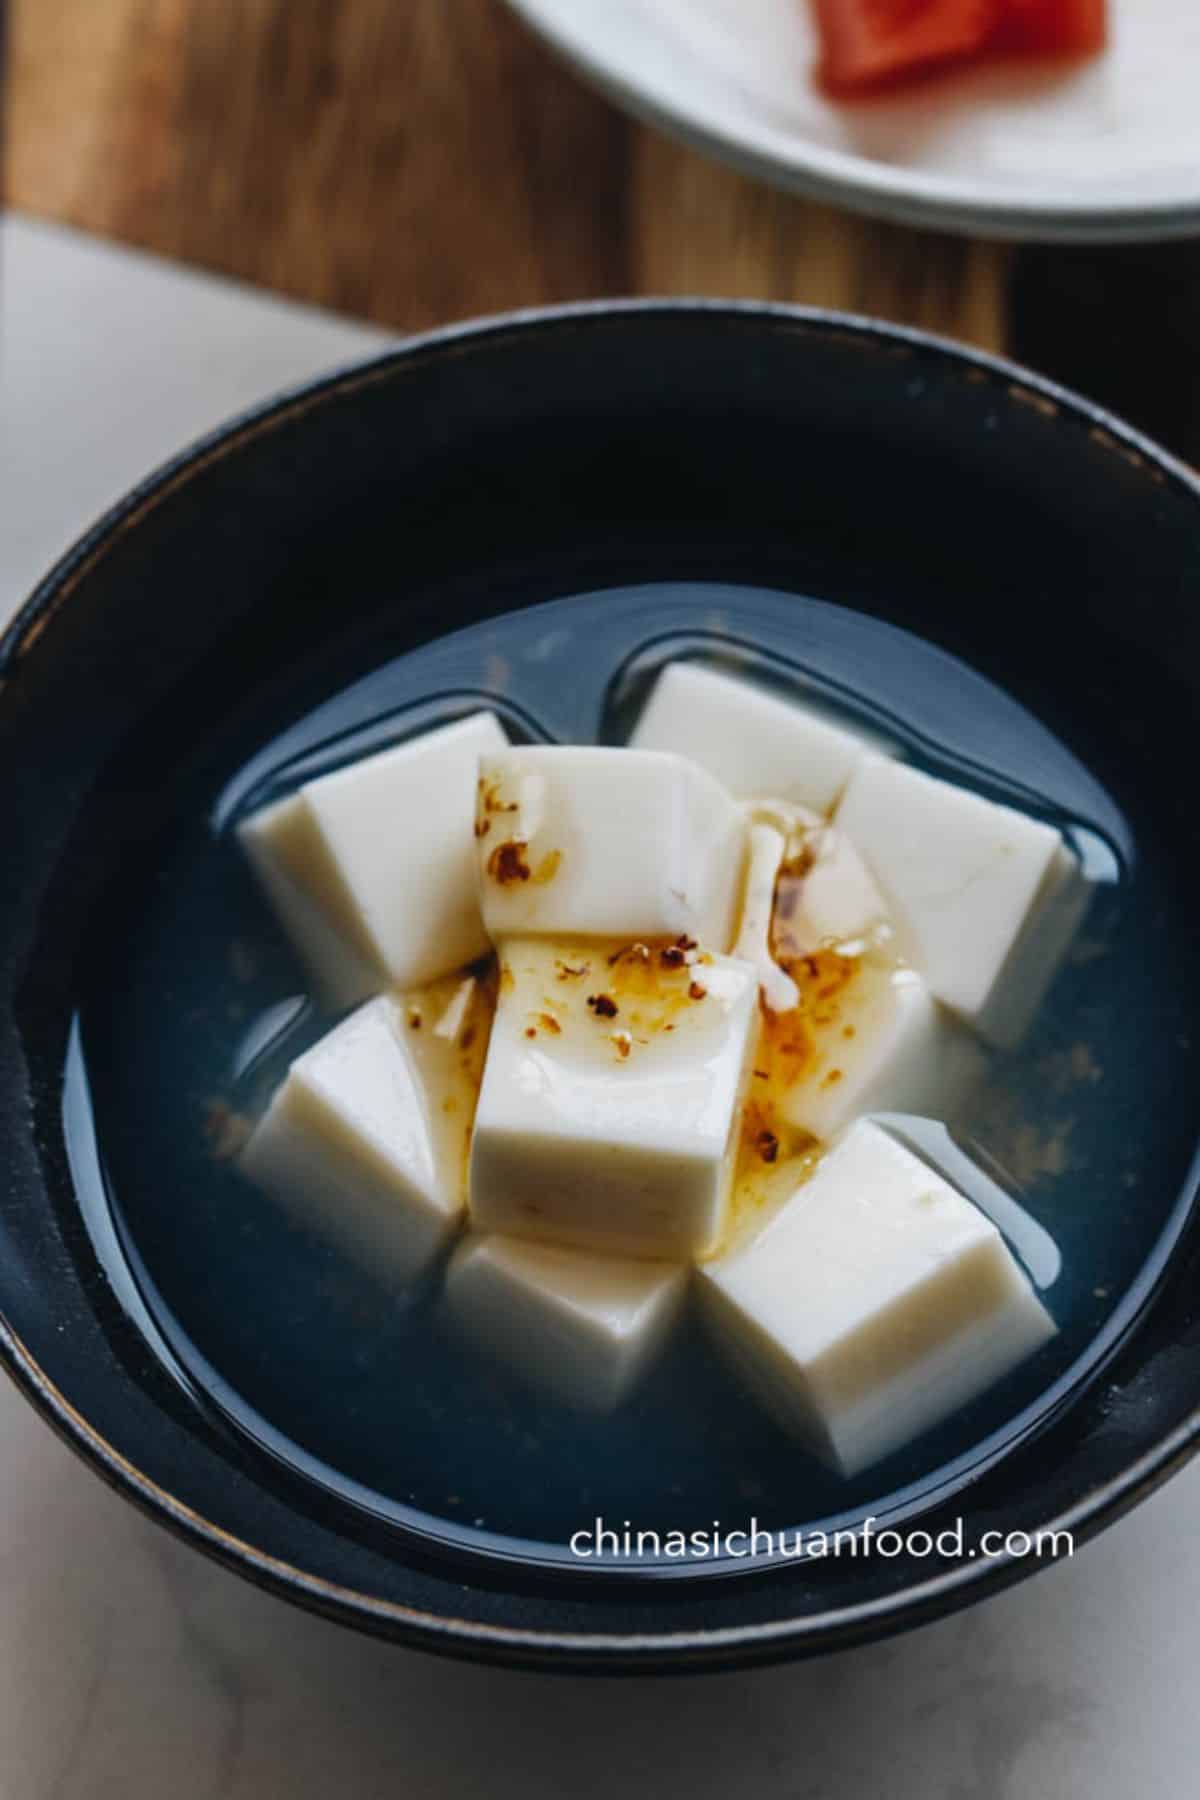 Almond Jelly chinese dessert in a black bowl.